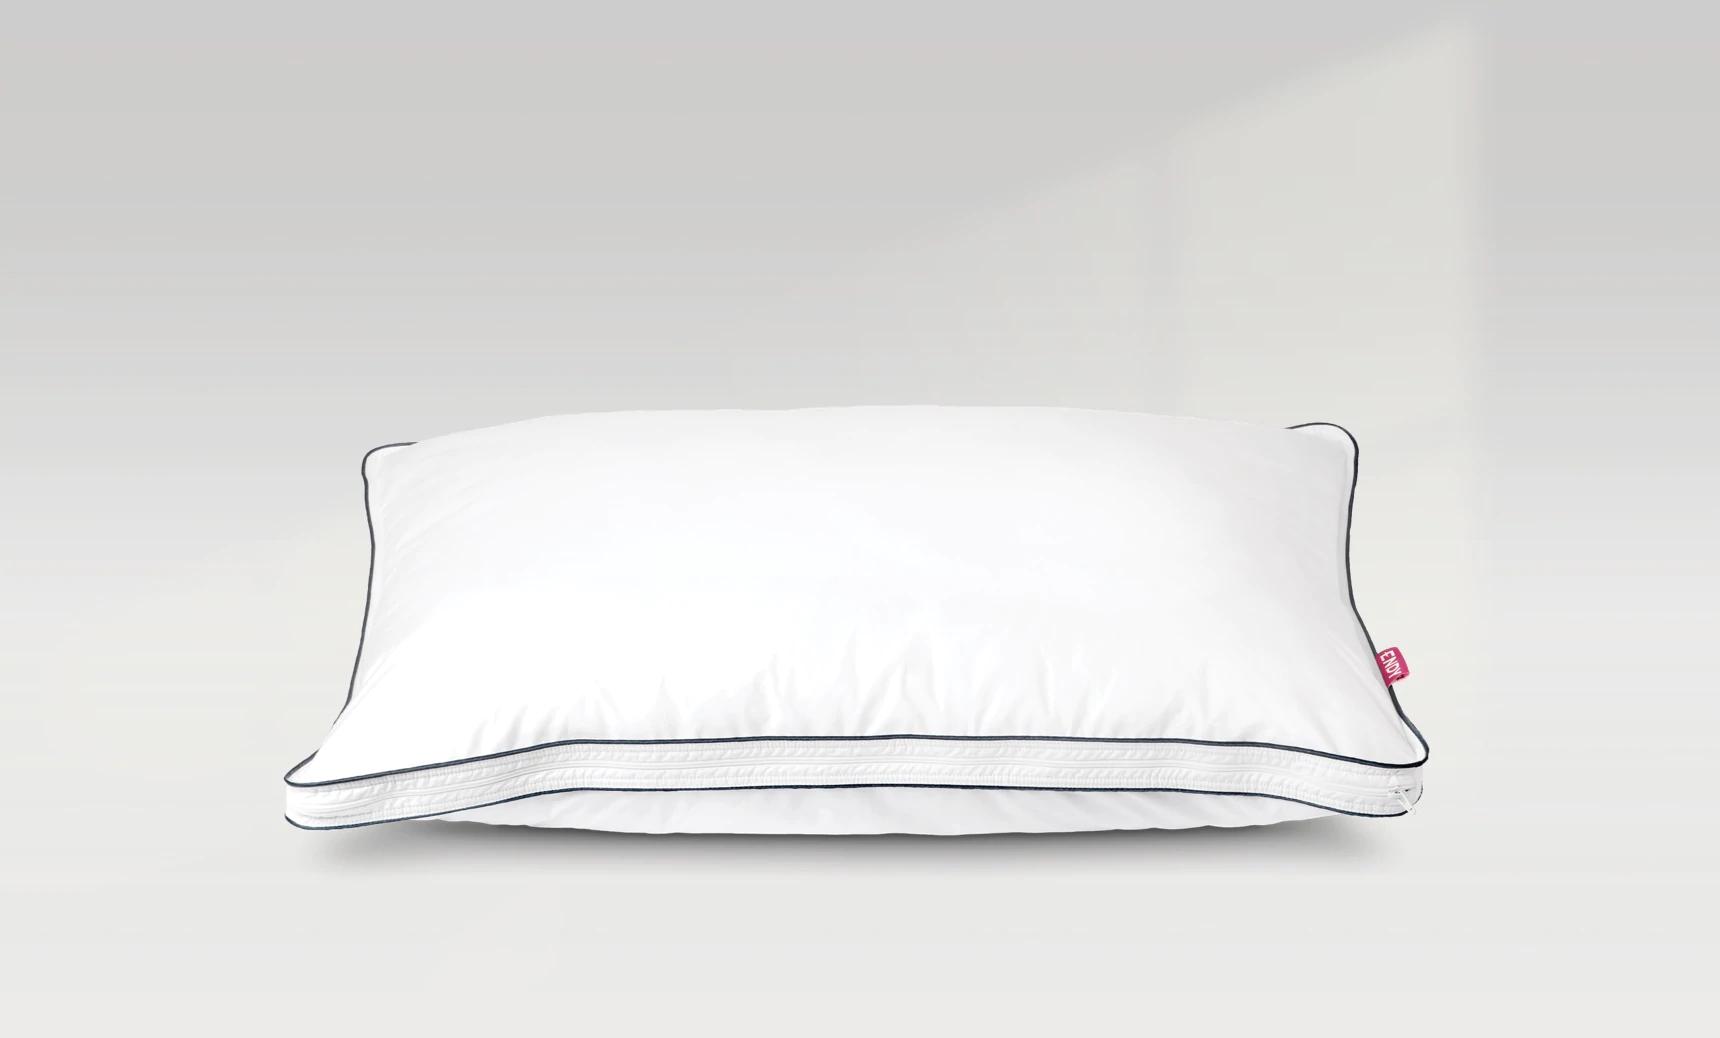 My Cool Comfort Pillow I 100% Customizable - The perfect pillow for